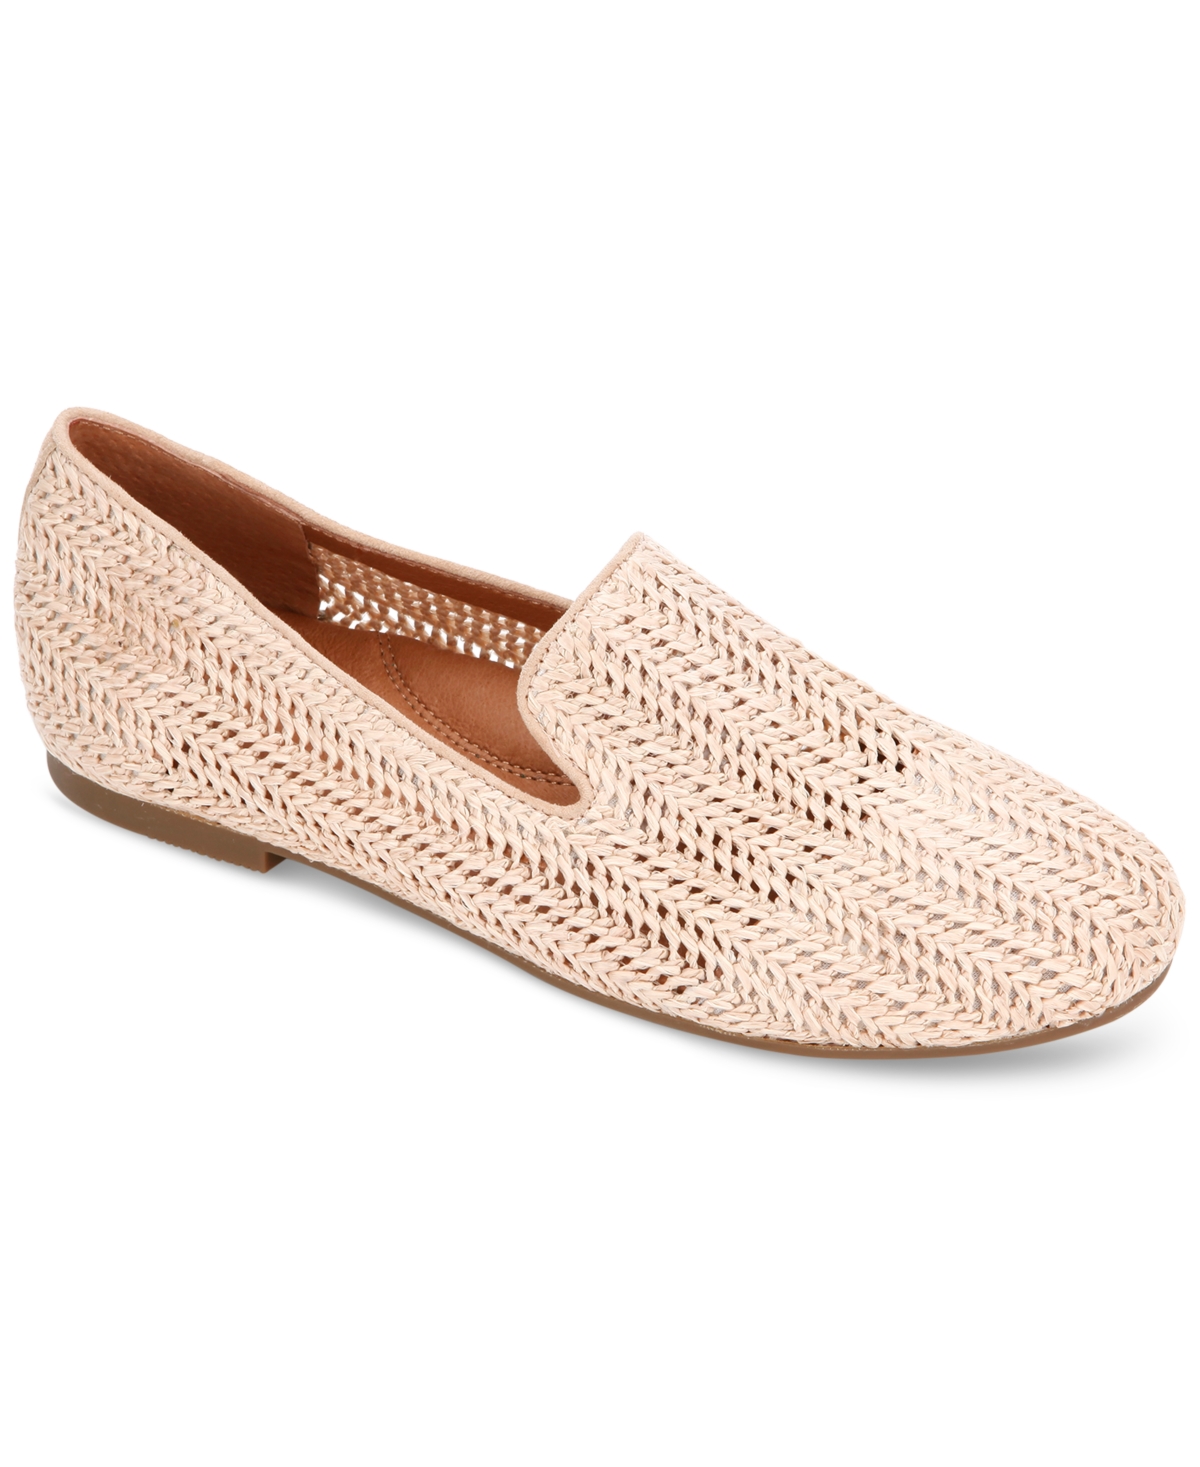 by Kenneth Cole Women's Eugene Smoking Flats - Natural